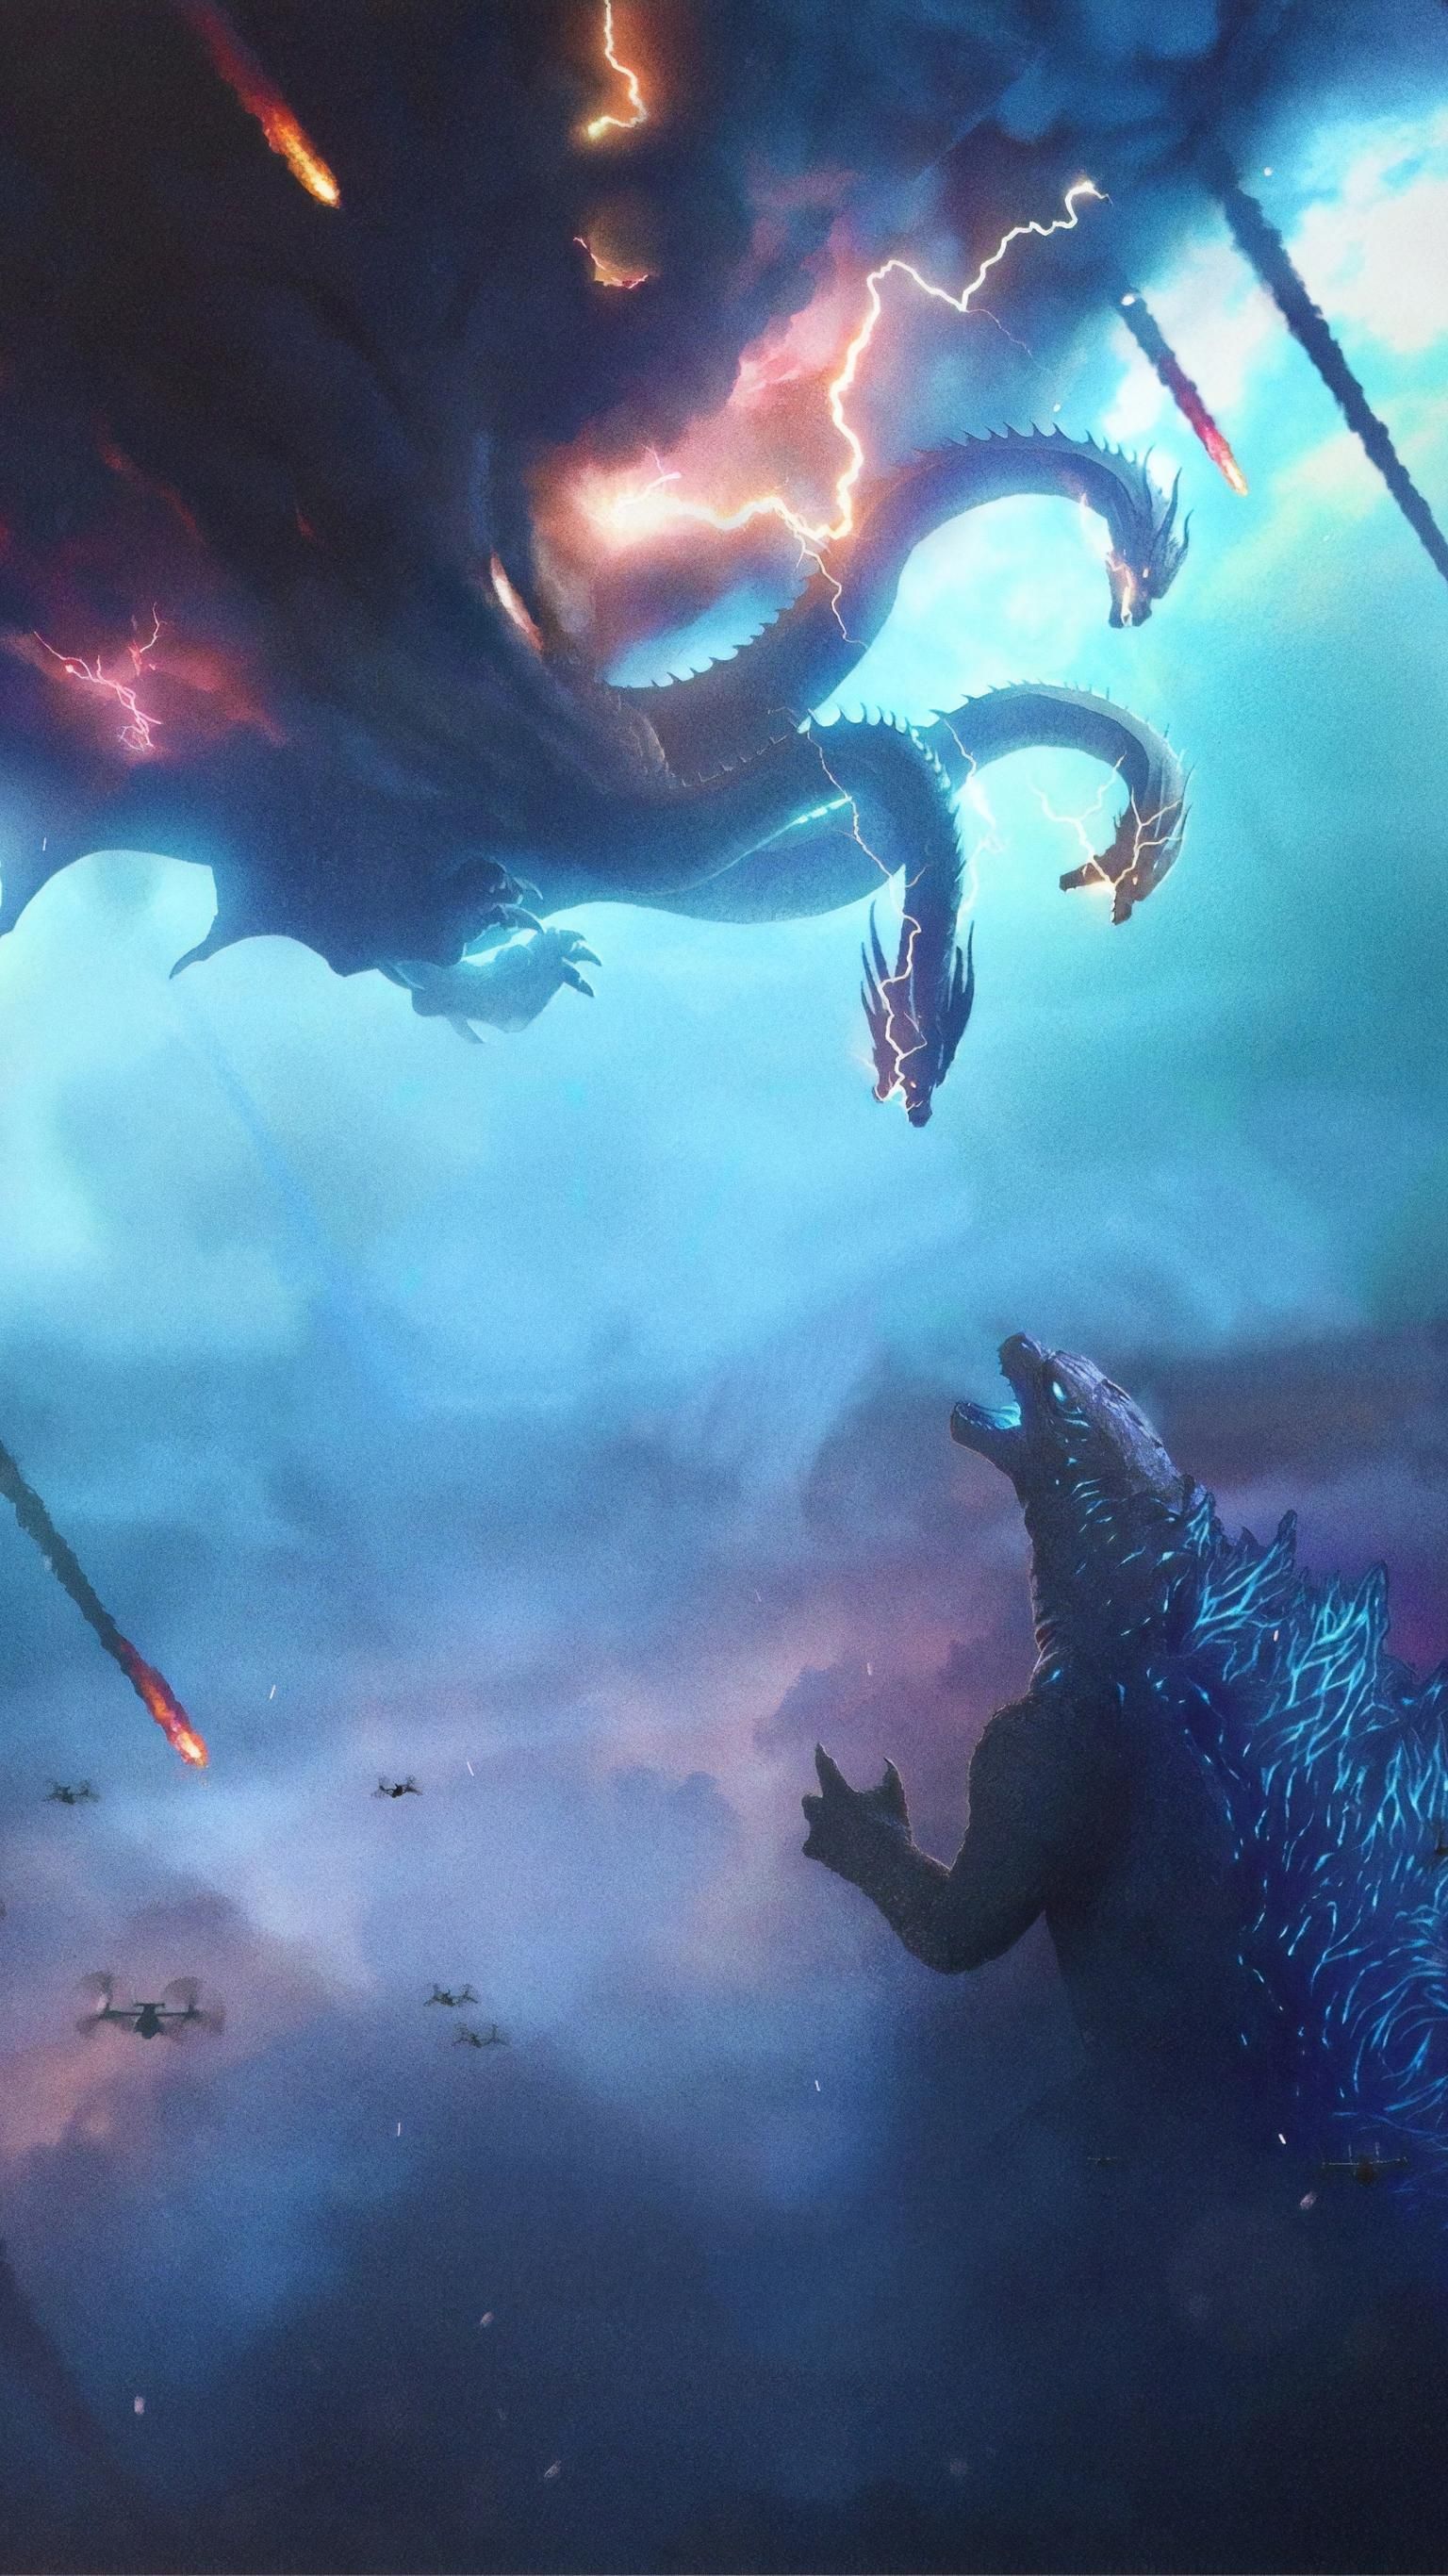 Godzilla: King of the Monsters (2019) Phone Wallpaper in 2020